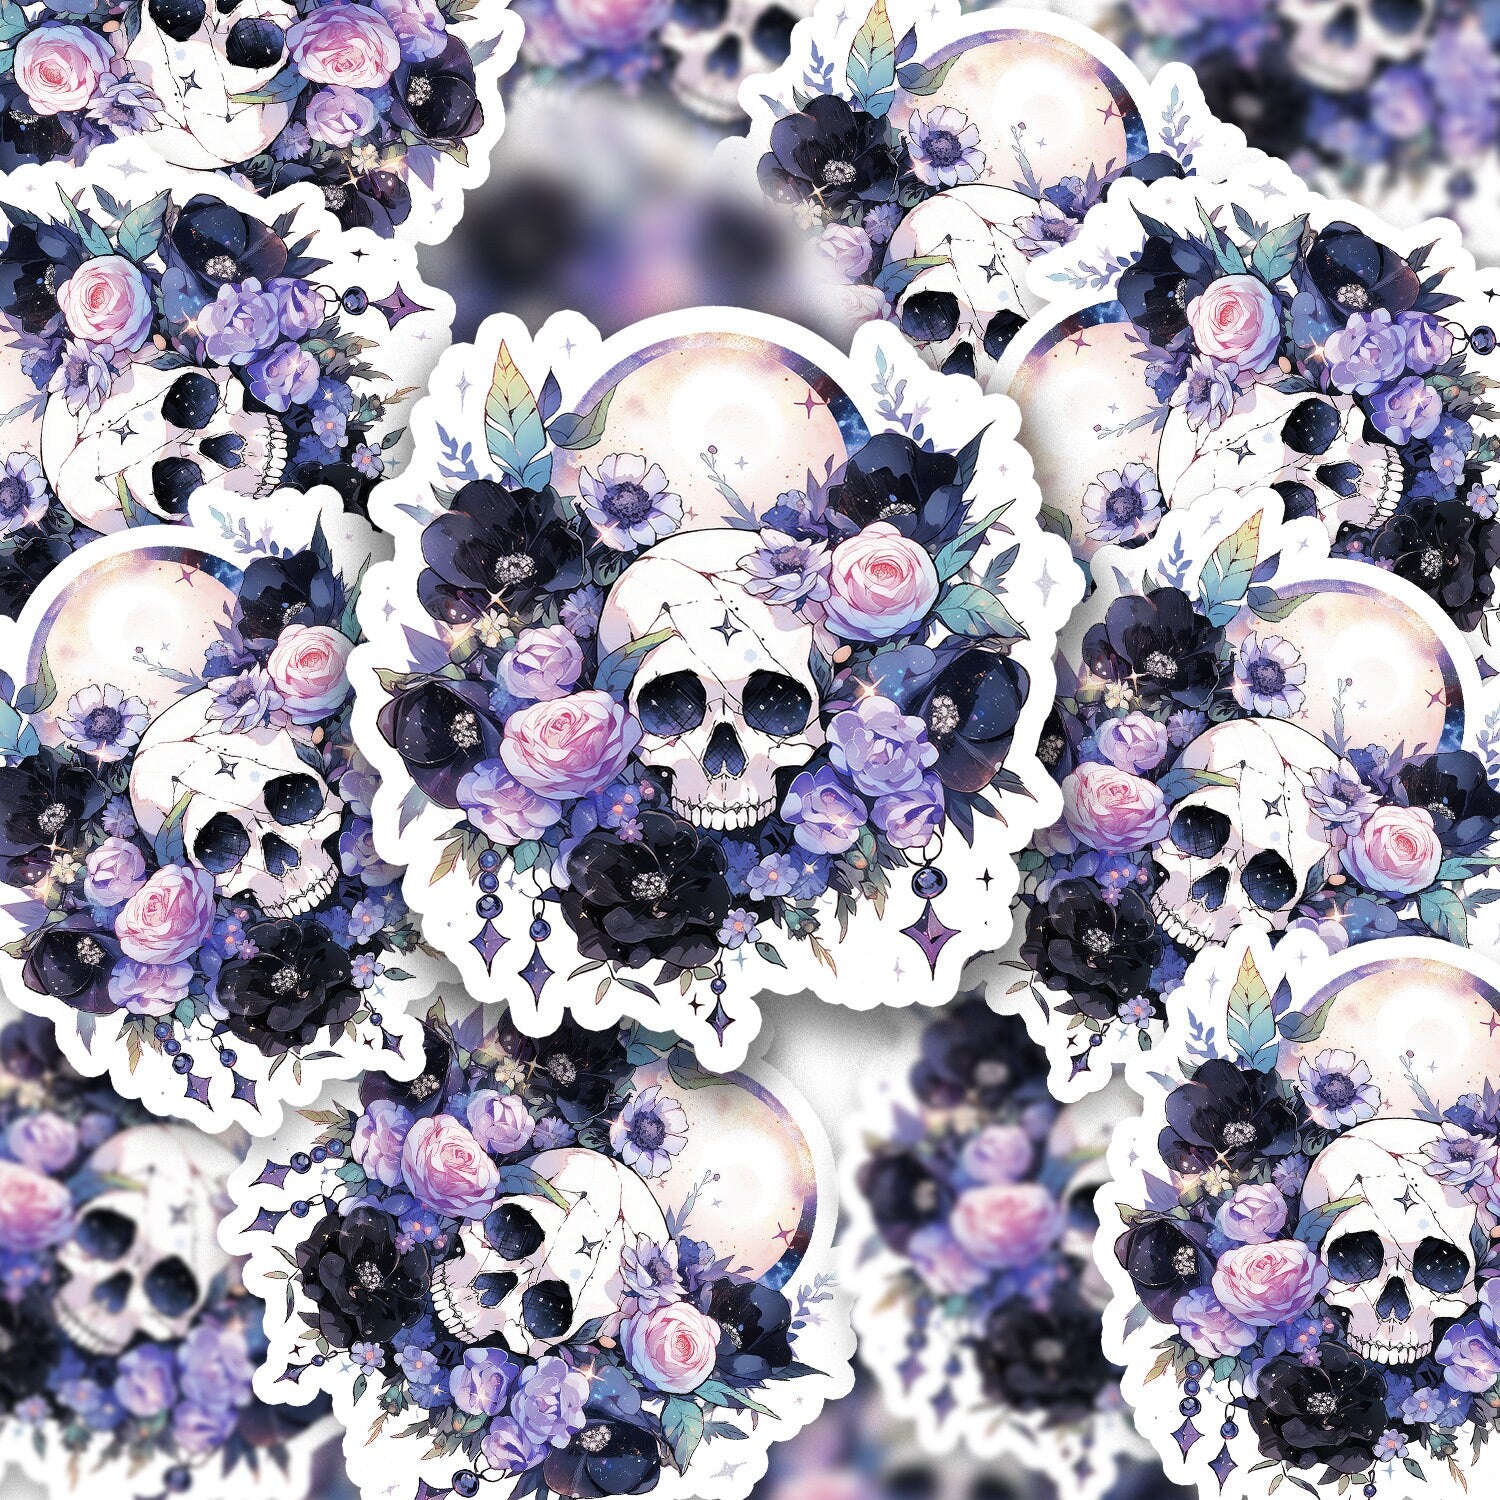 Floral Gothic Skull Sticker || Witchy Halloween Sticker, magic stickers, witchy decor, laptop, Kindle Stickers, pastel goth spooky